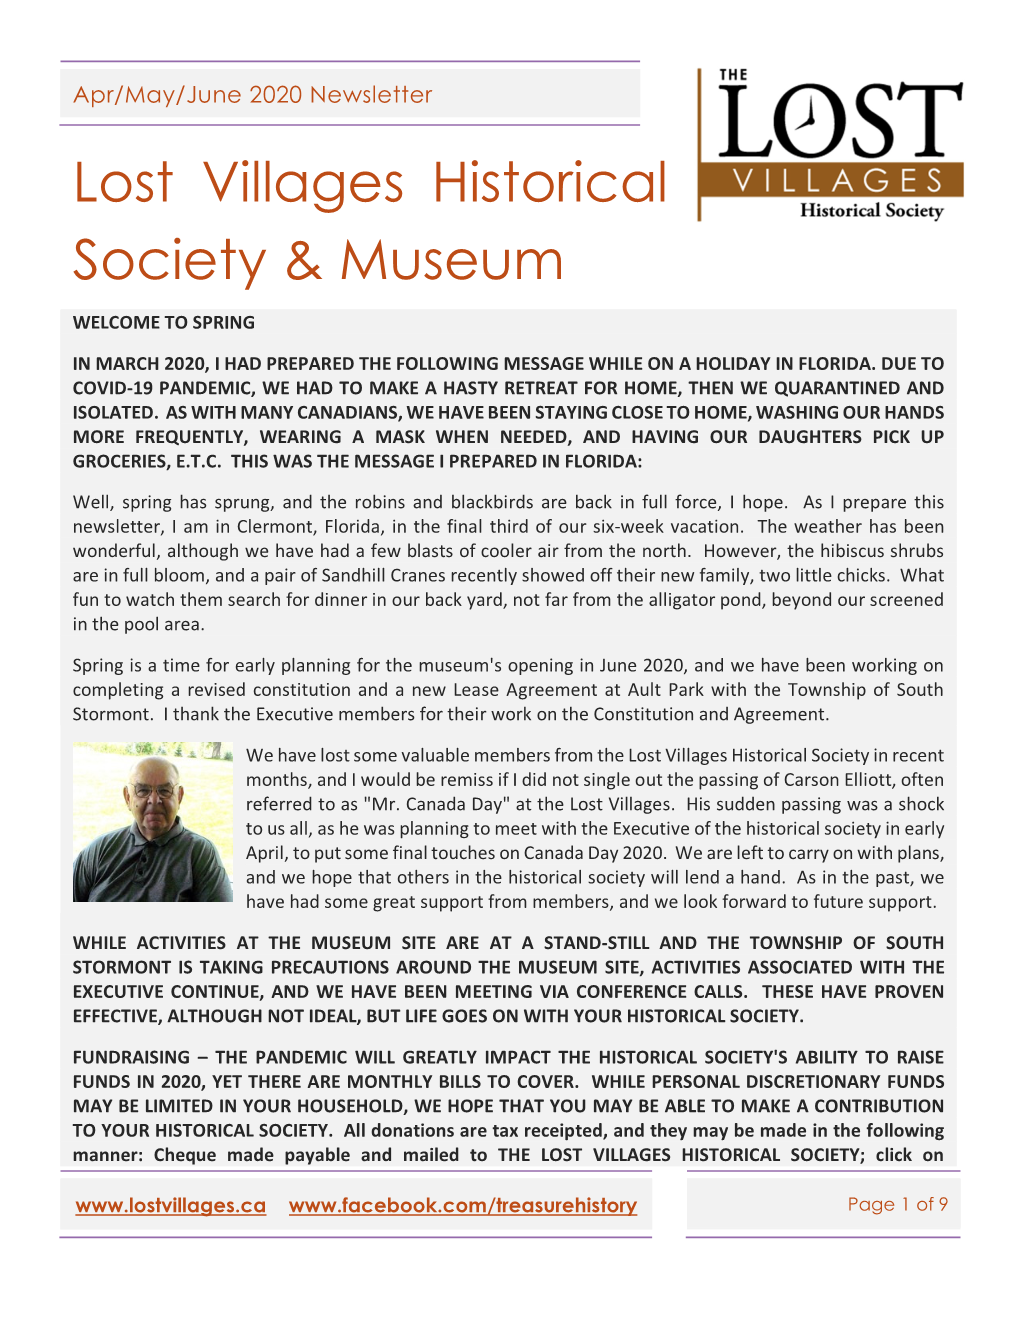 Lost Villages Historical Society & Museum